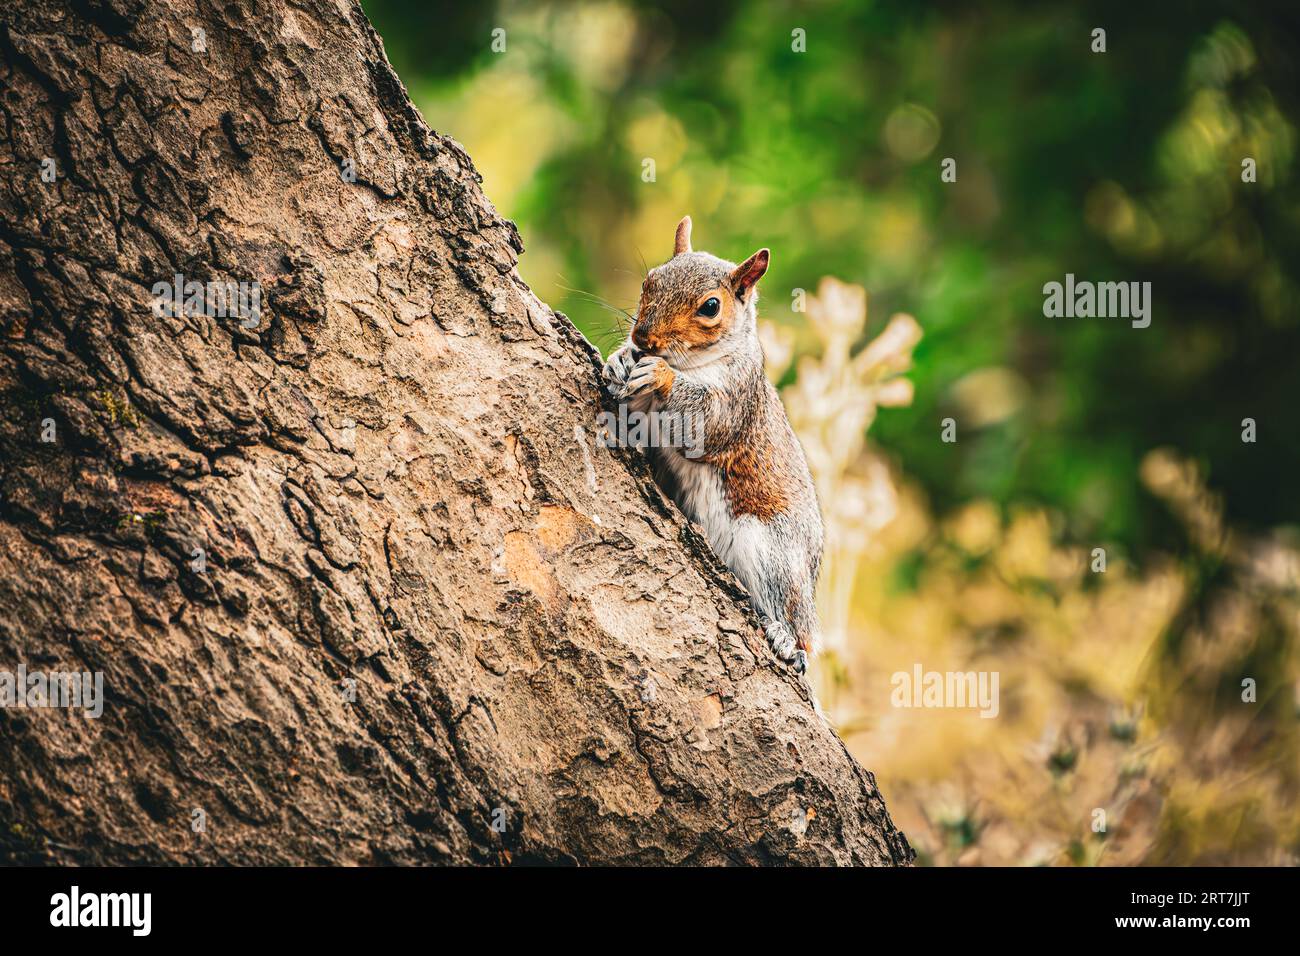 Curious squirrel on a tree in London park Stock Photo